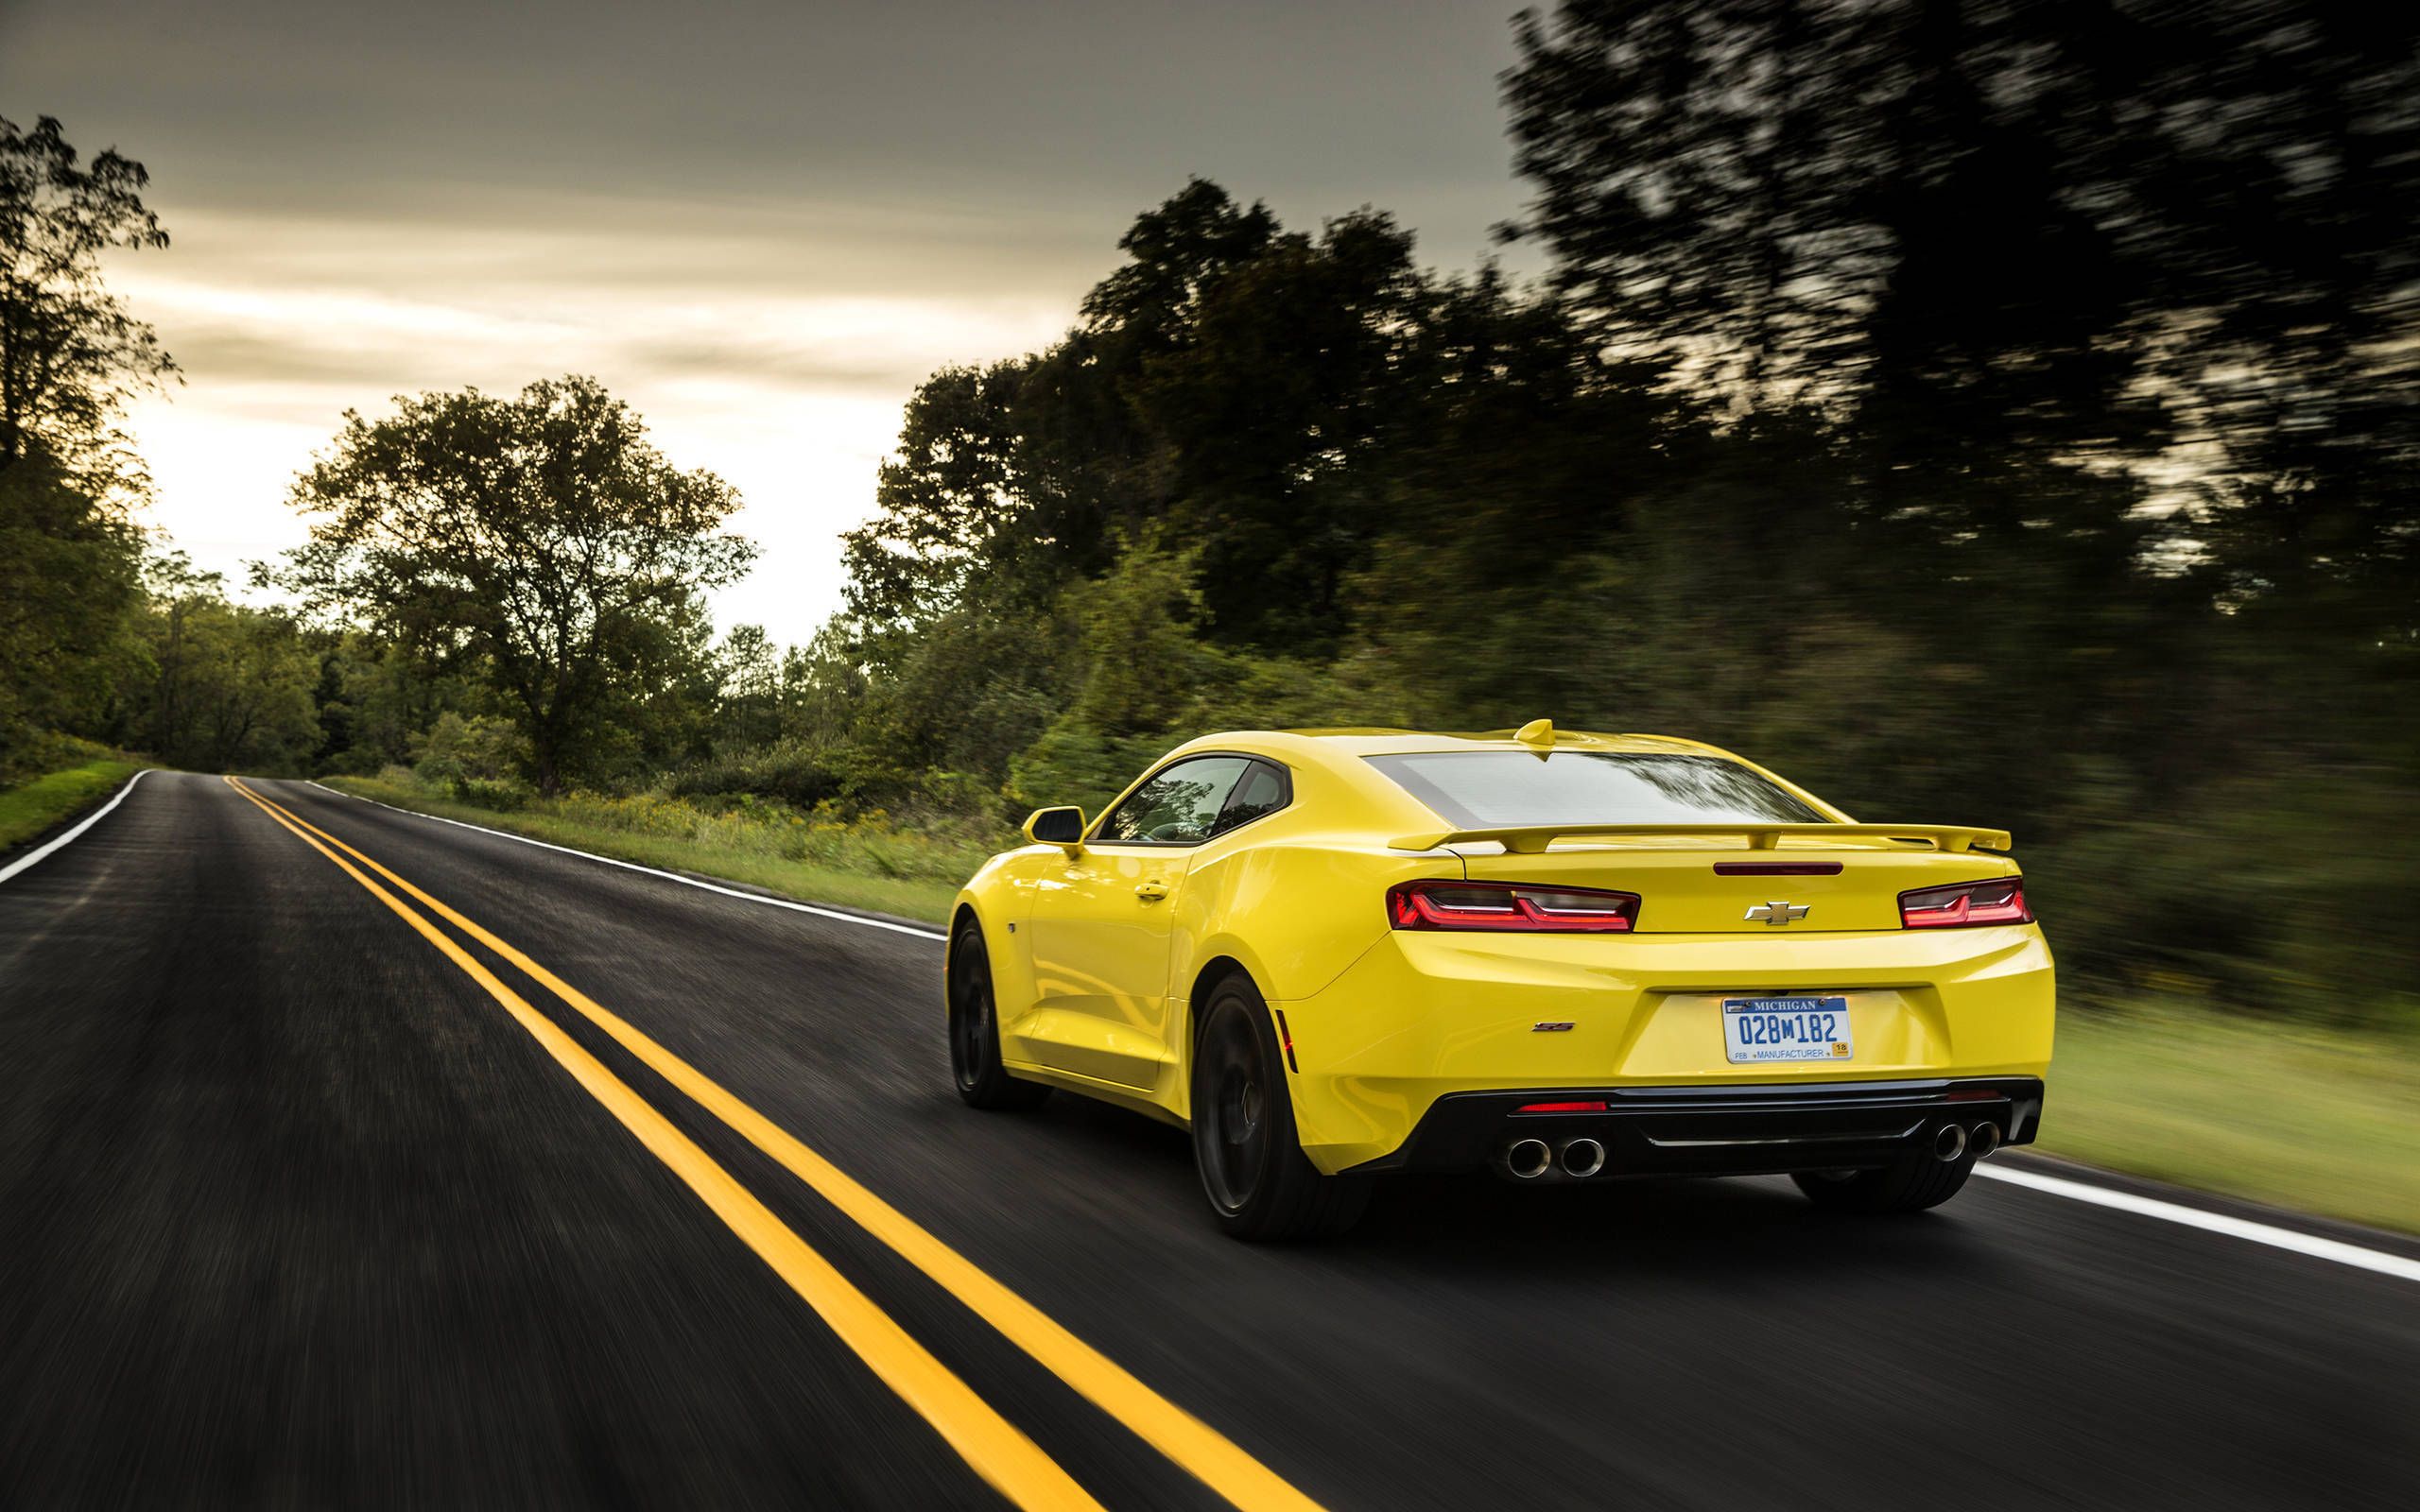 2016 Chevrolet Camaro SS Review: A True Sports Car at Last?